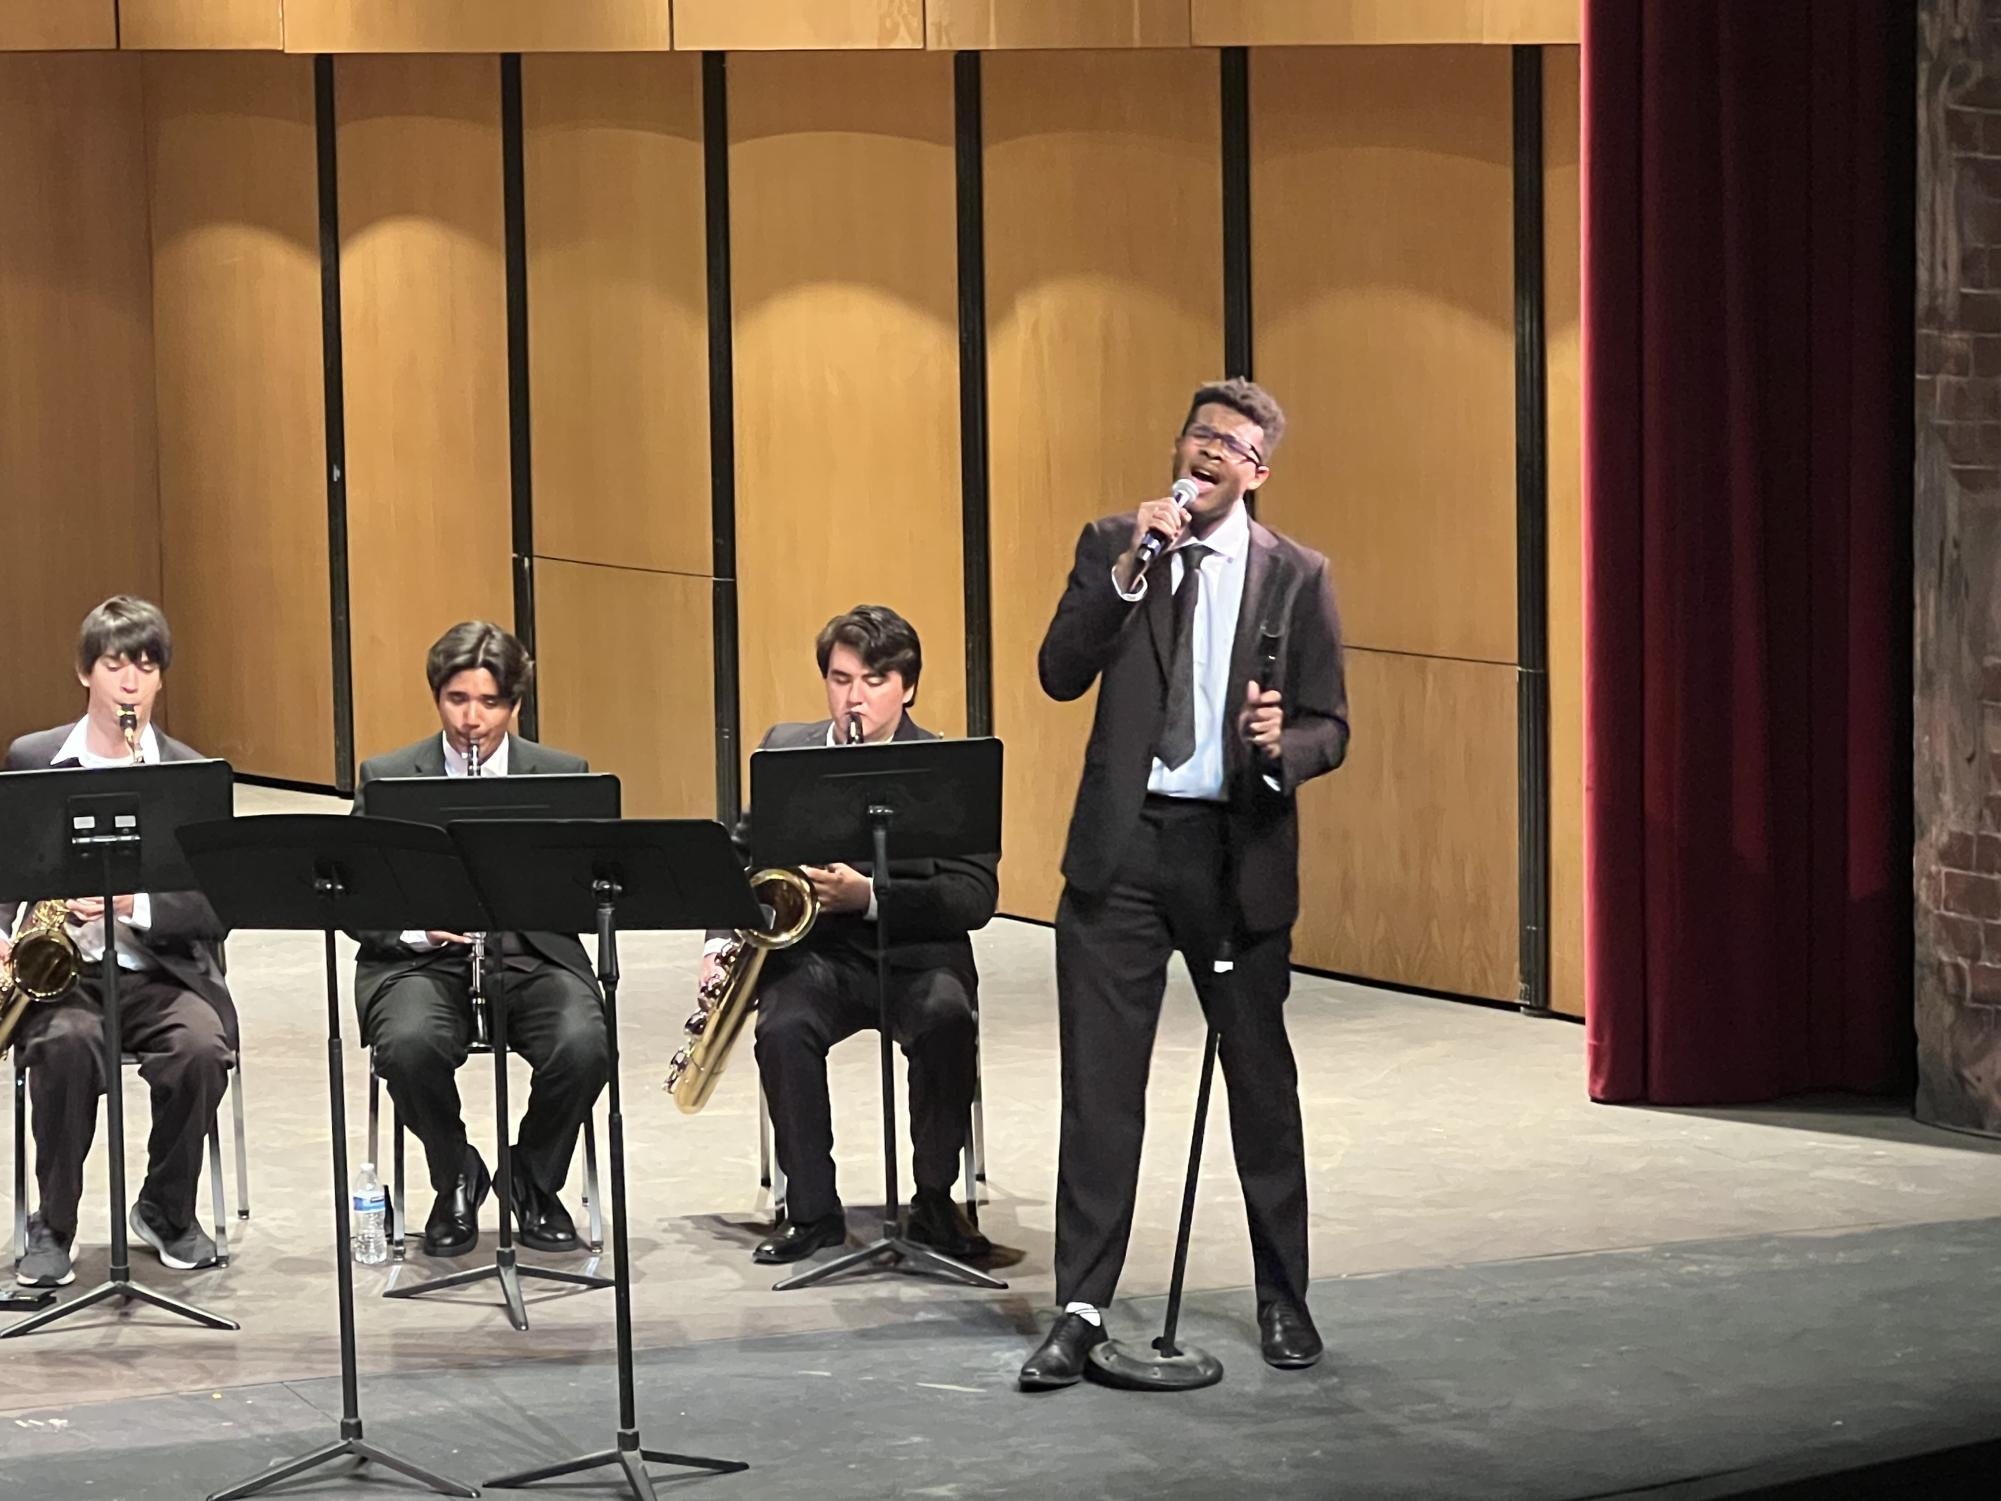 Moorpark College&squot;s Jazz Ensemble performing "God Bless the Child" by Arthur Herzog Jr & Billie Holiday on May 4, 2024 in "Harmonious Journeys."